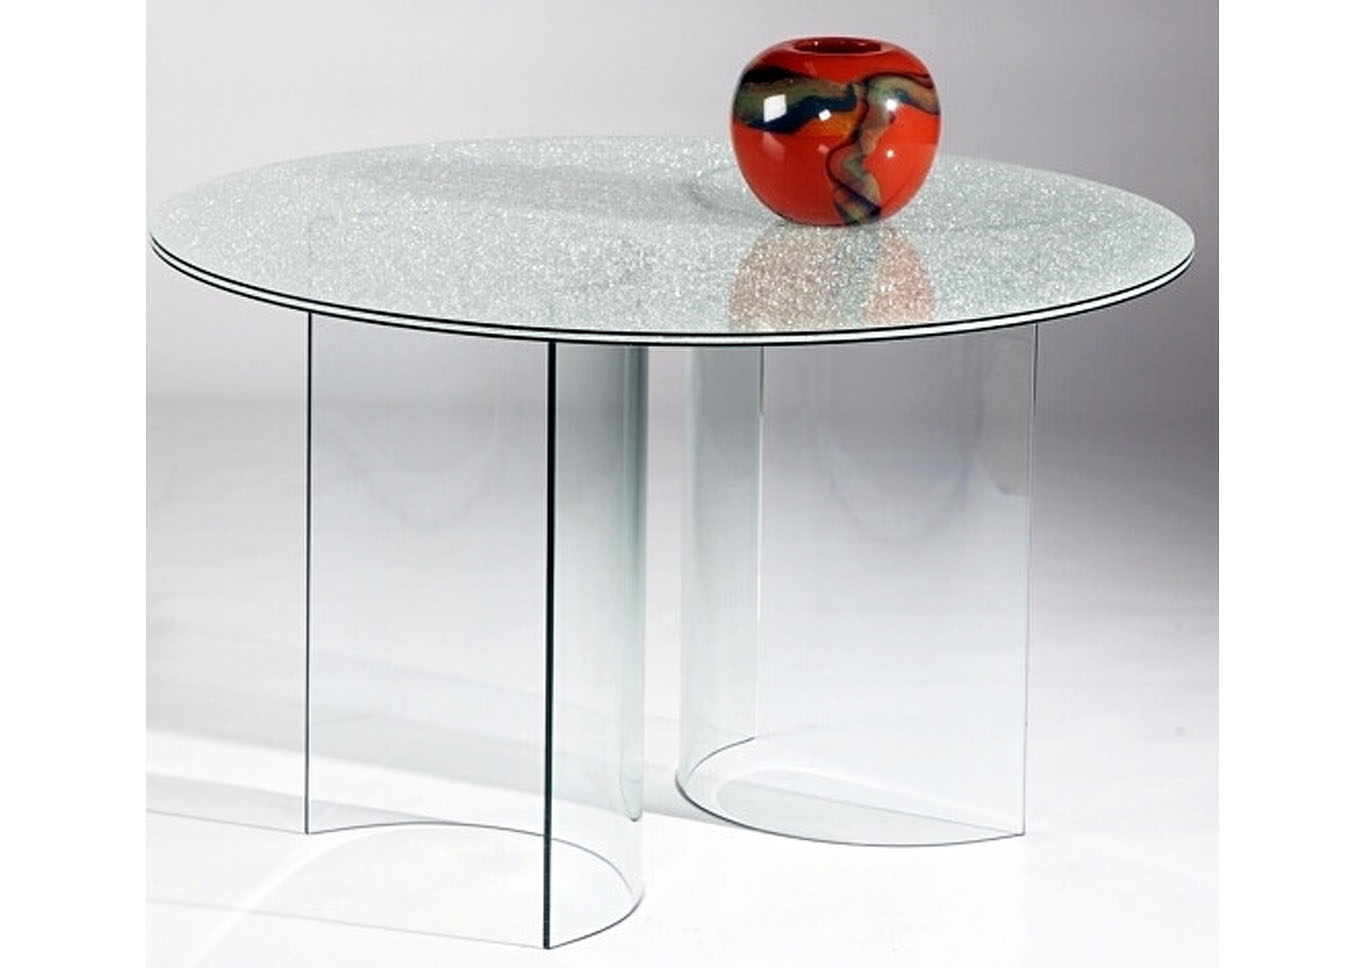 Light Grey Round Crackled Glass Dining Table,Chintaly Imports